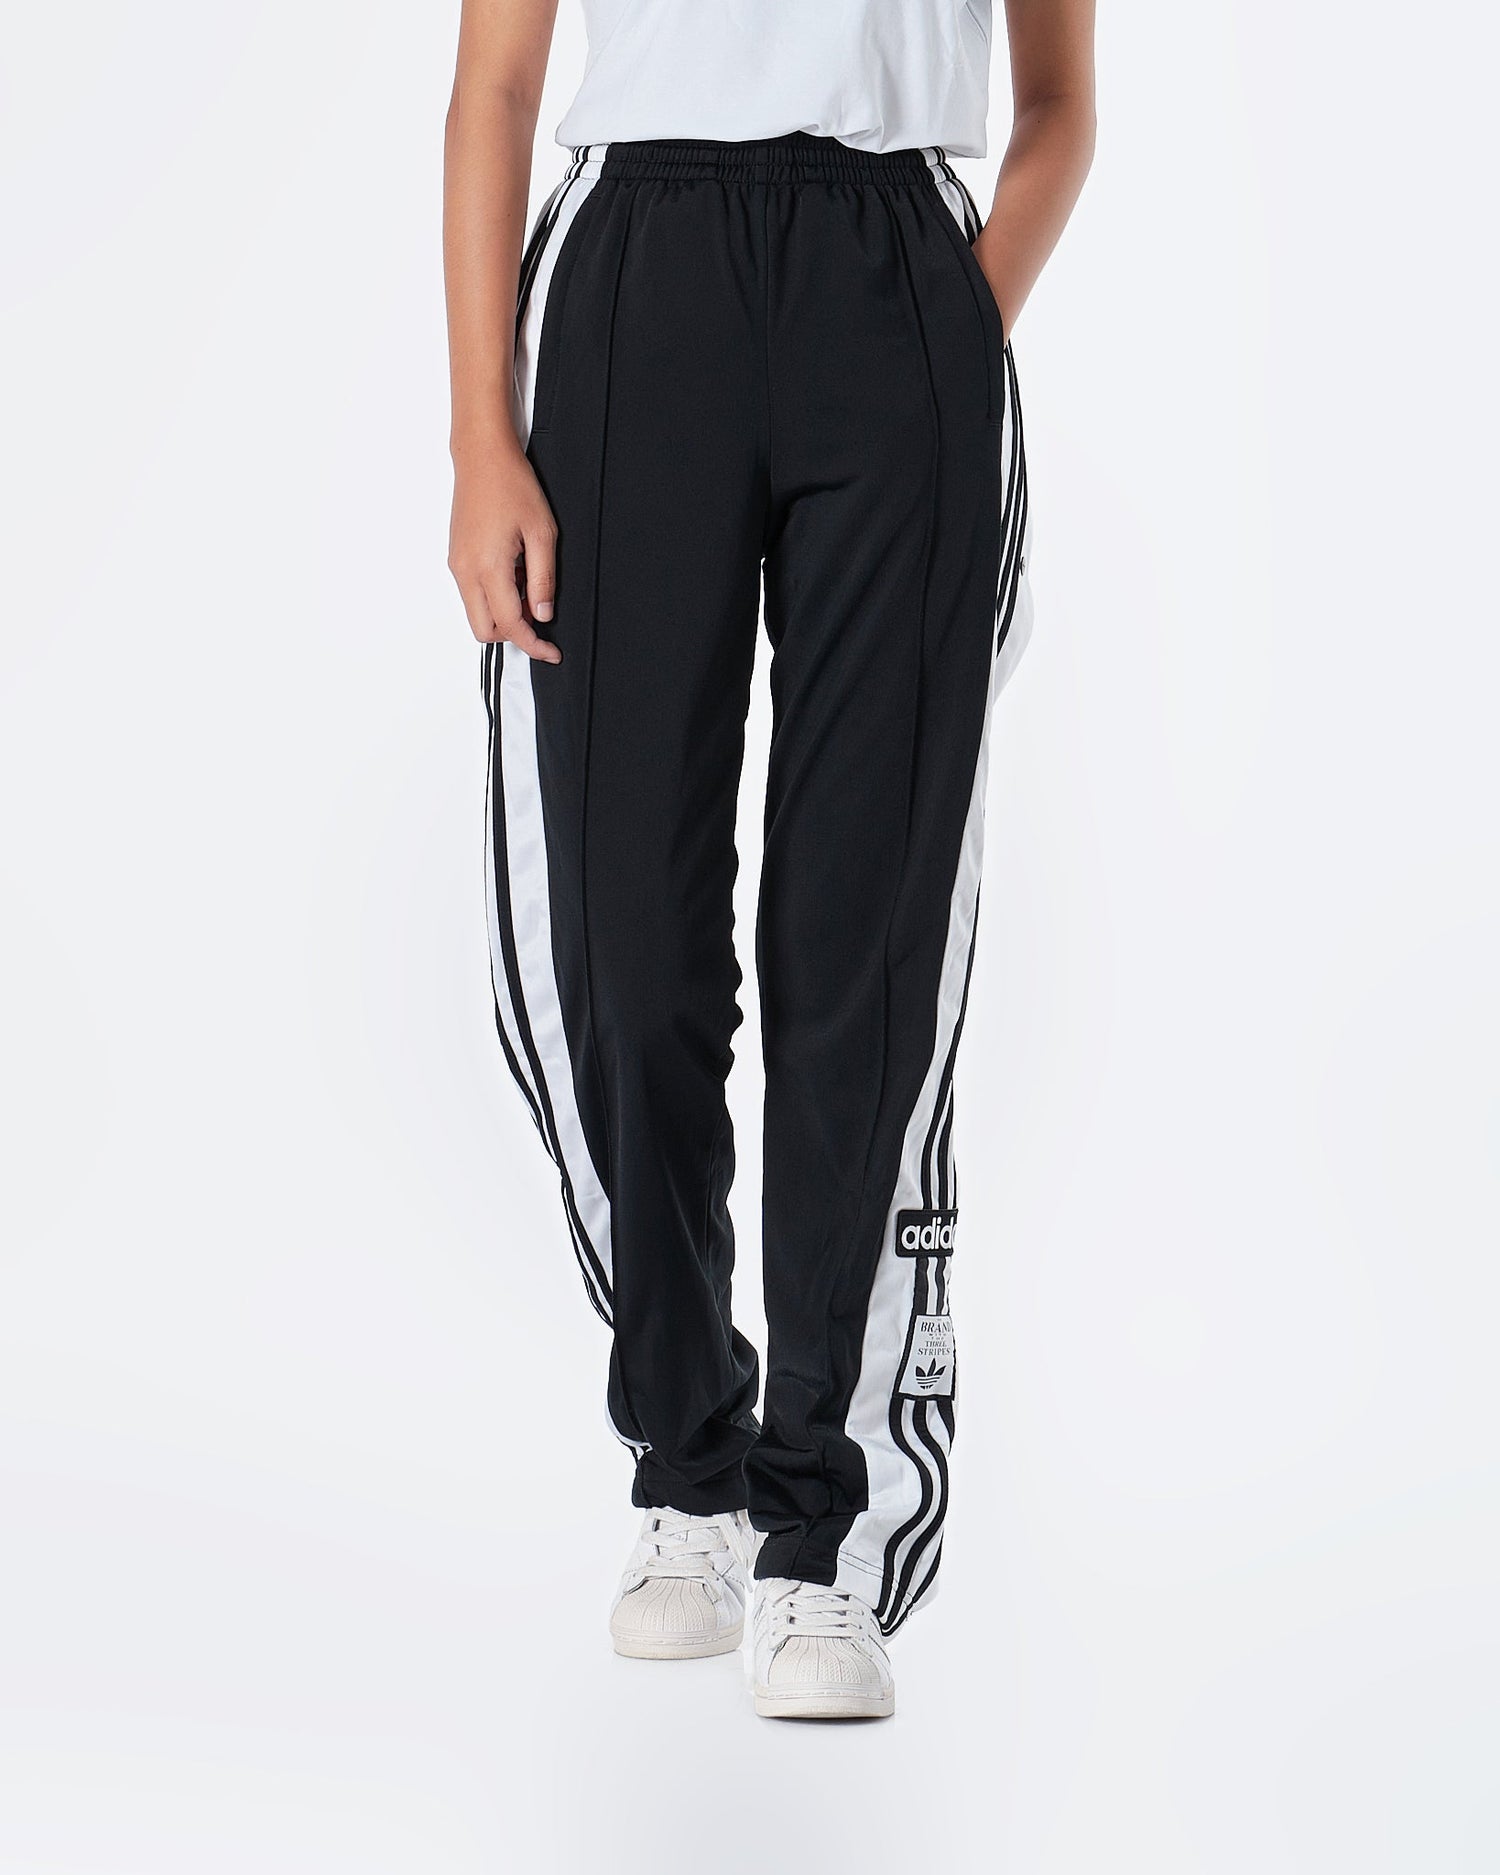 https://moioutfit.com/cdn/shop/products/classic-adibreak-lady-track-pants-3490-moi-outfit-346481.jpg?v=1687876865&width=1500